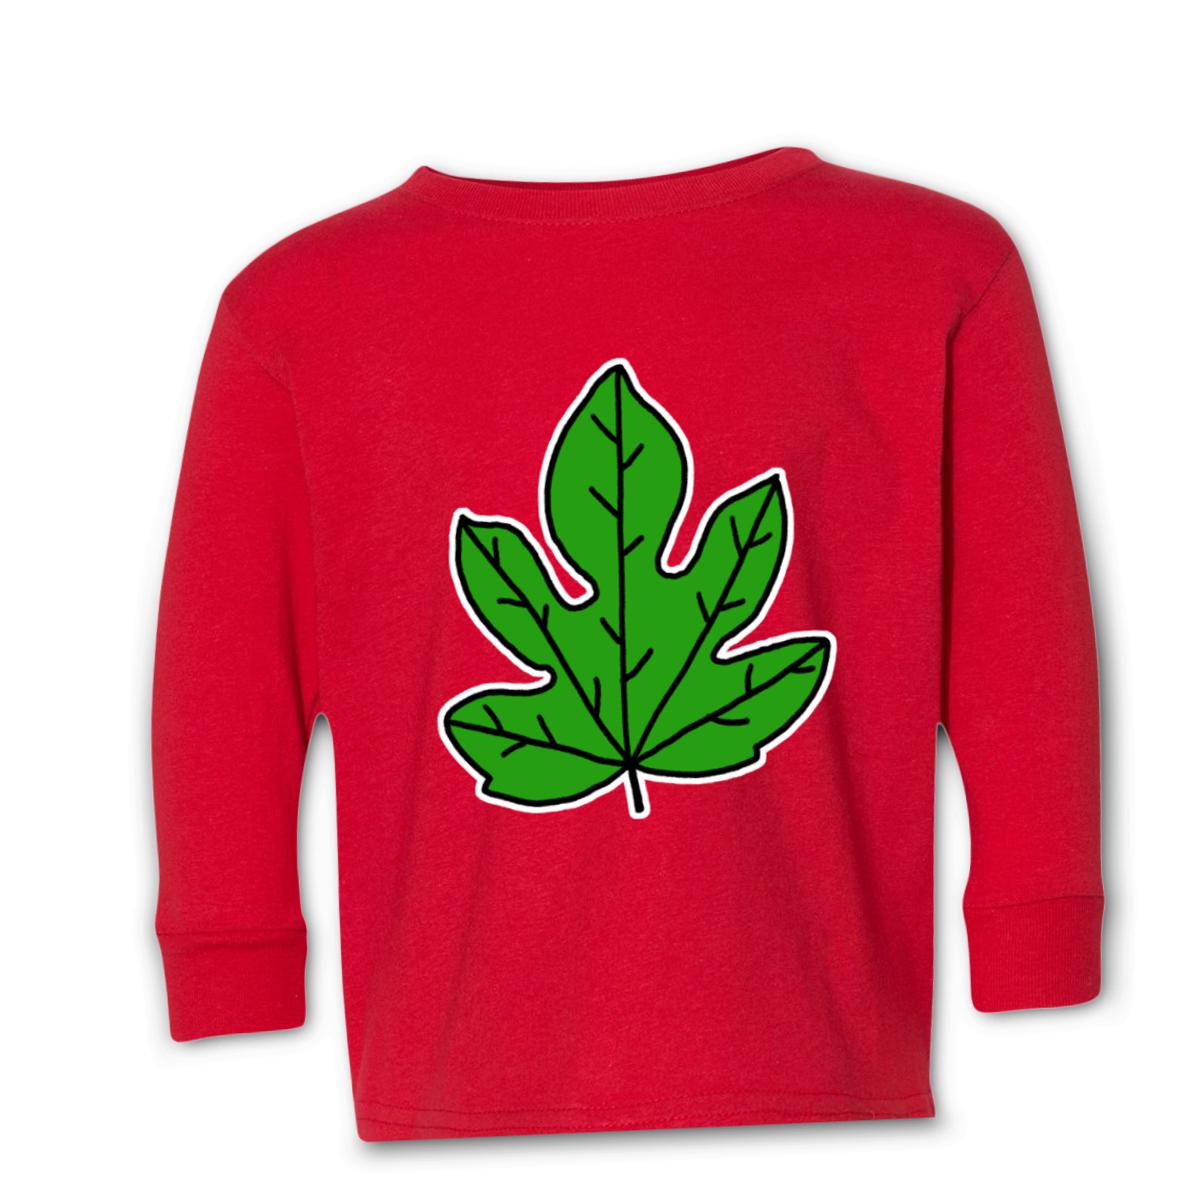 Fig Leaf Kid's Long Sleeve Tee Small red